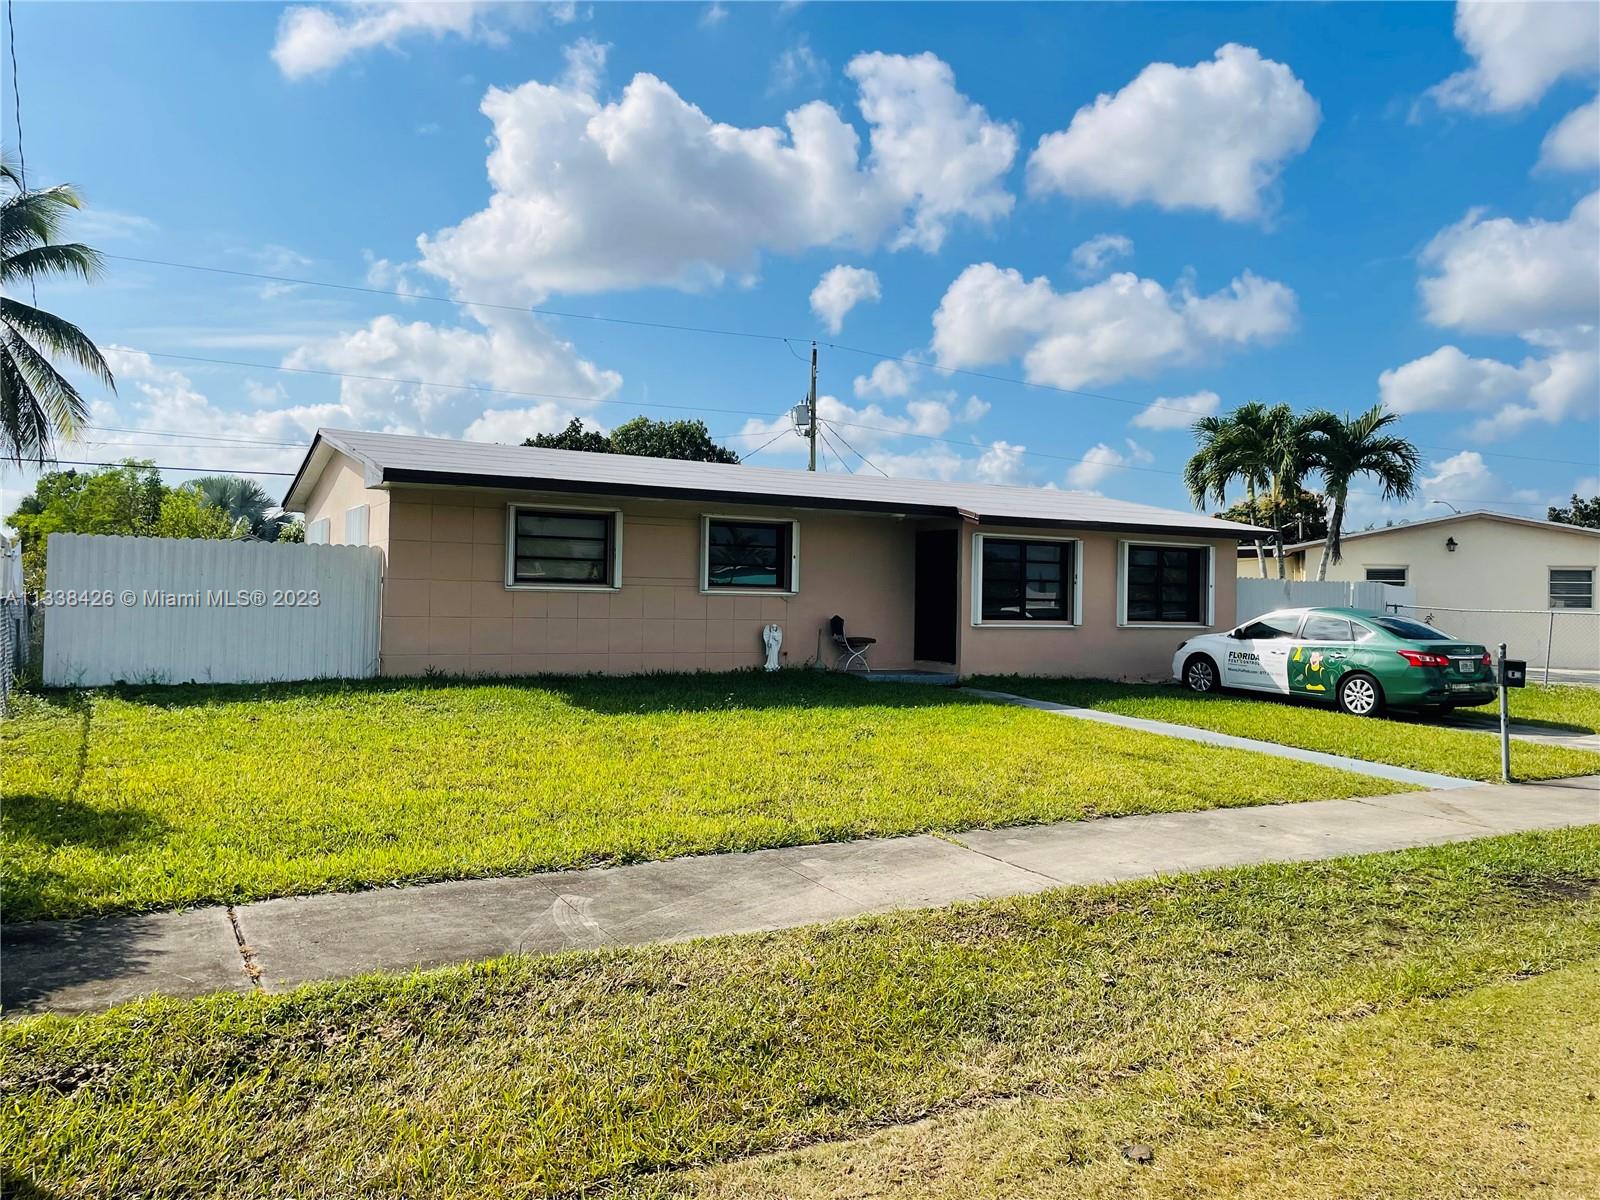 11870 187th St SW, Miami, FL 33177 - MLS A11338426 - Coldwell Banker